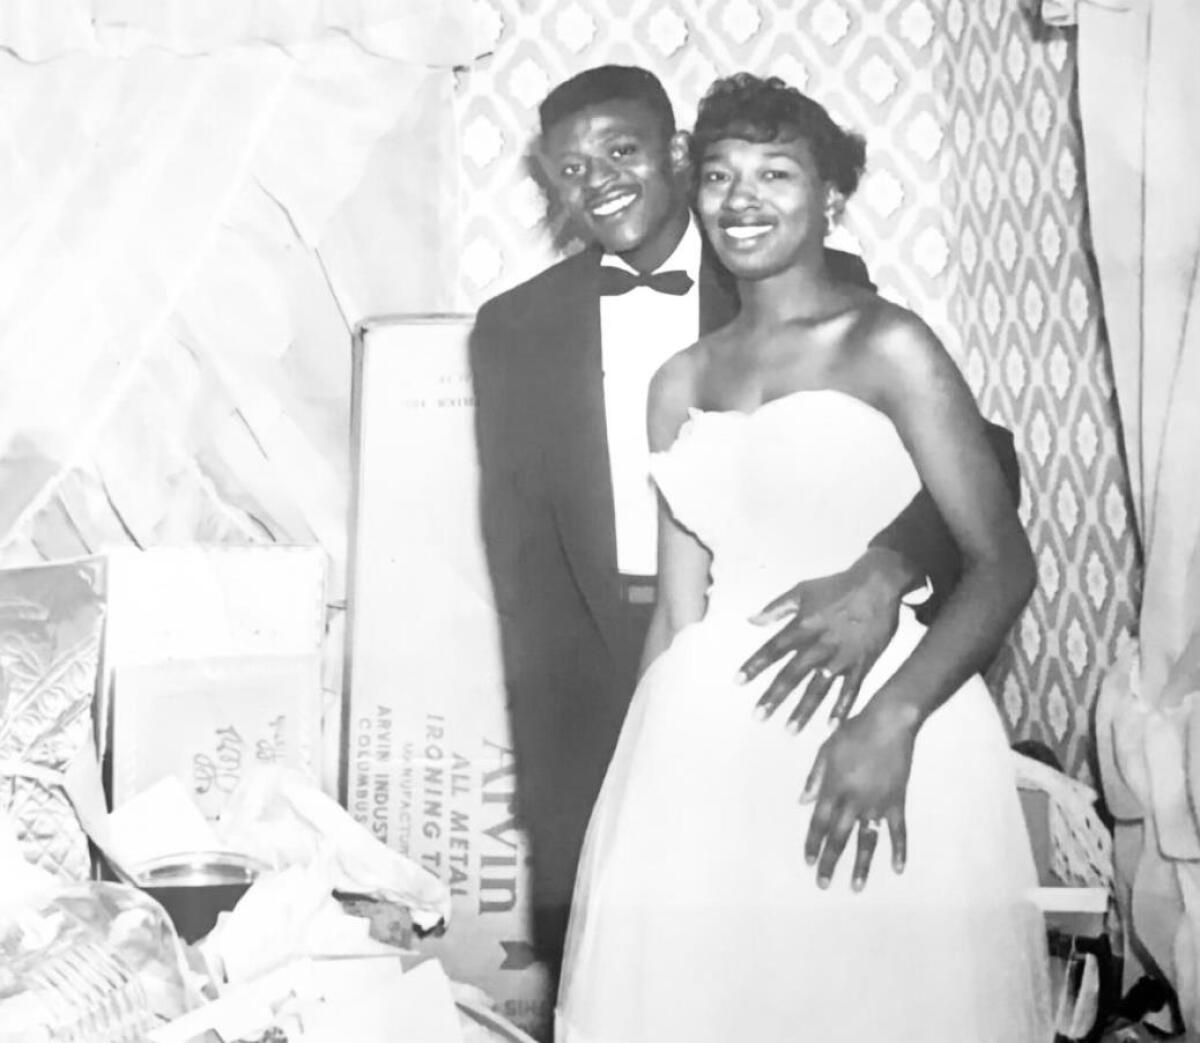 A man in a tuxedo and a woman in a wedding dress smile next to each other.